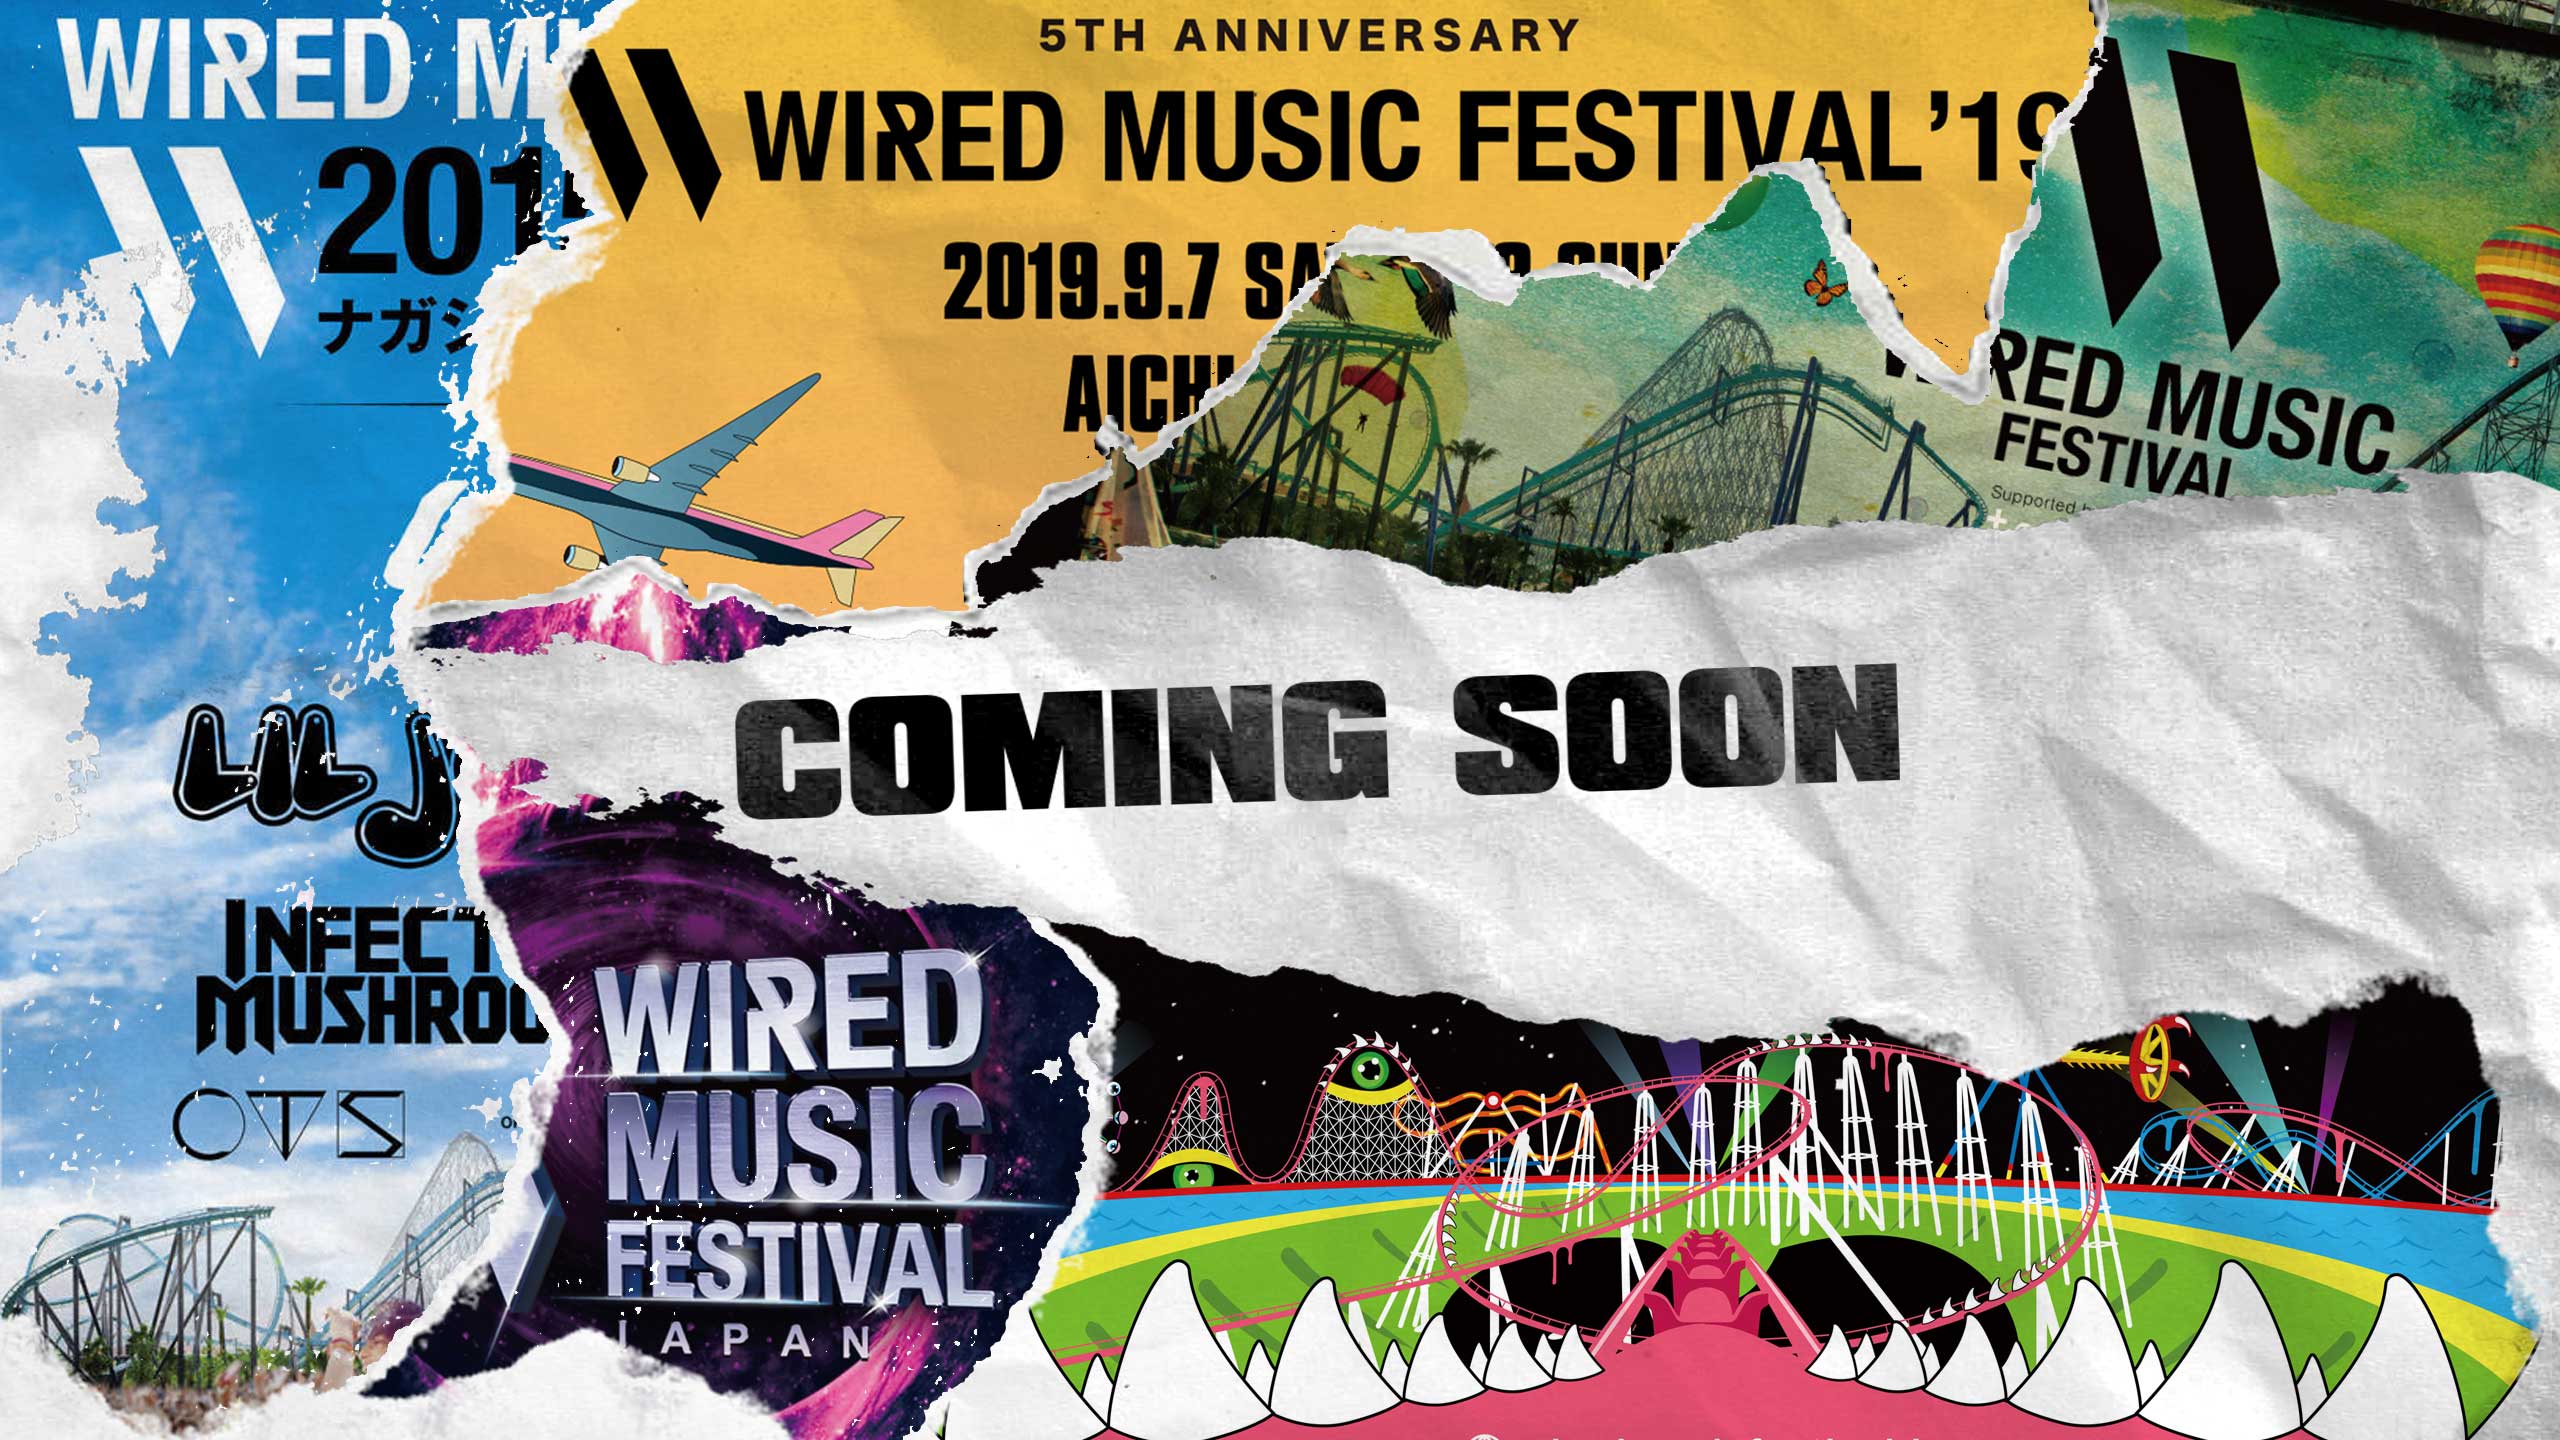 WIRED MUSIC FESTIVAL’21